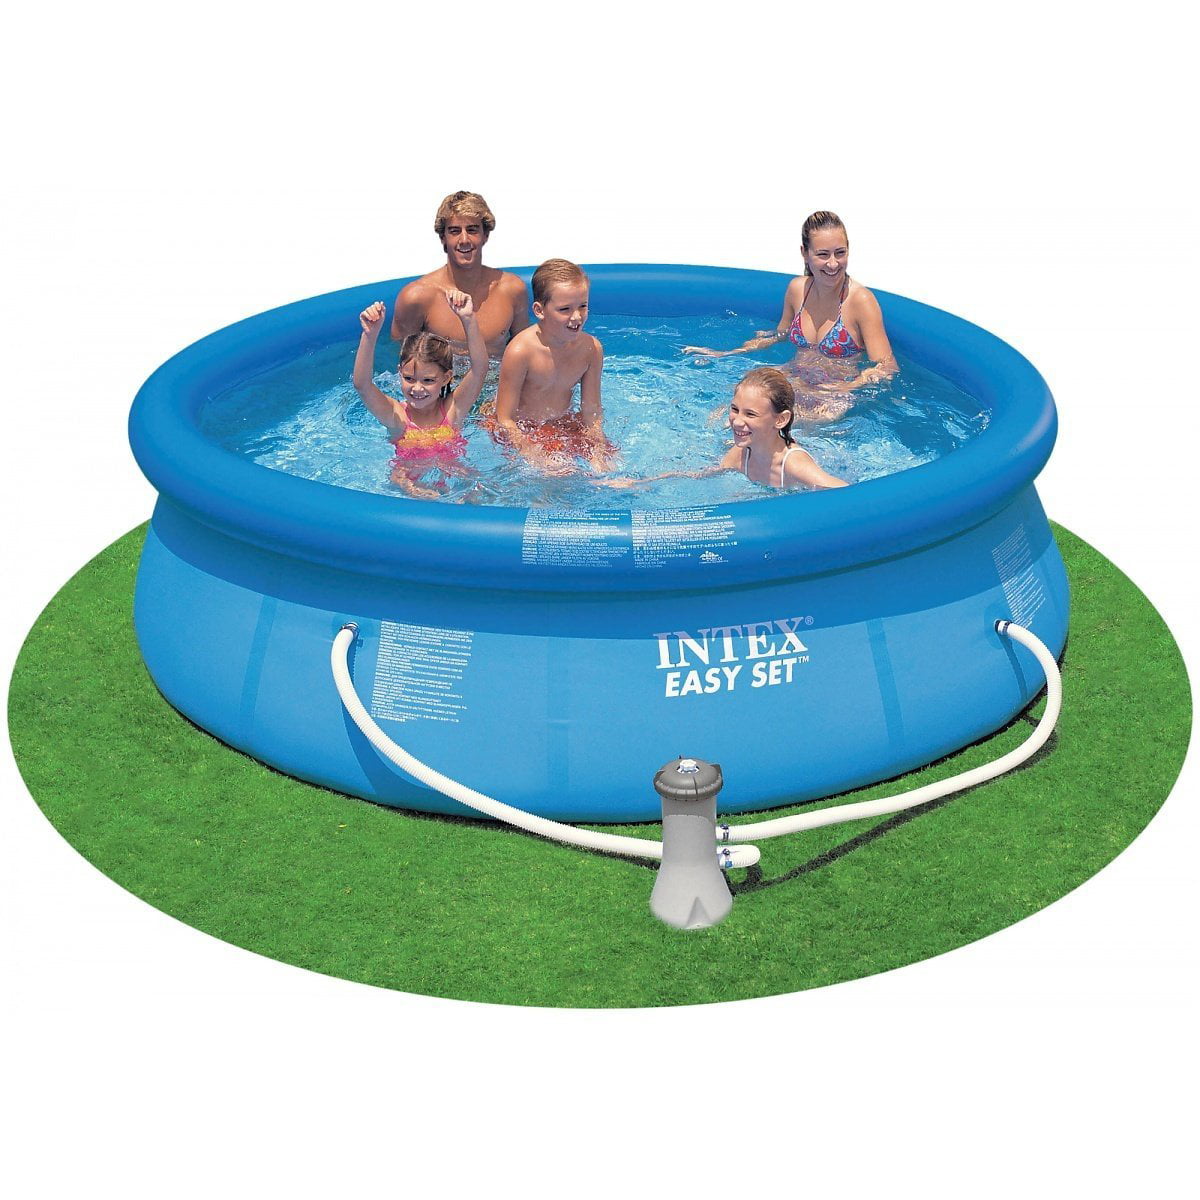 Summer Waves Quick Set Swimming Pool With Filter Unit 1074 Gallons 3.05 Metres Wide 76 CM Deep